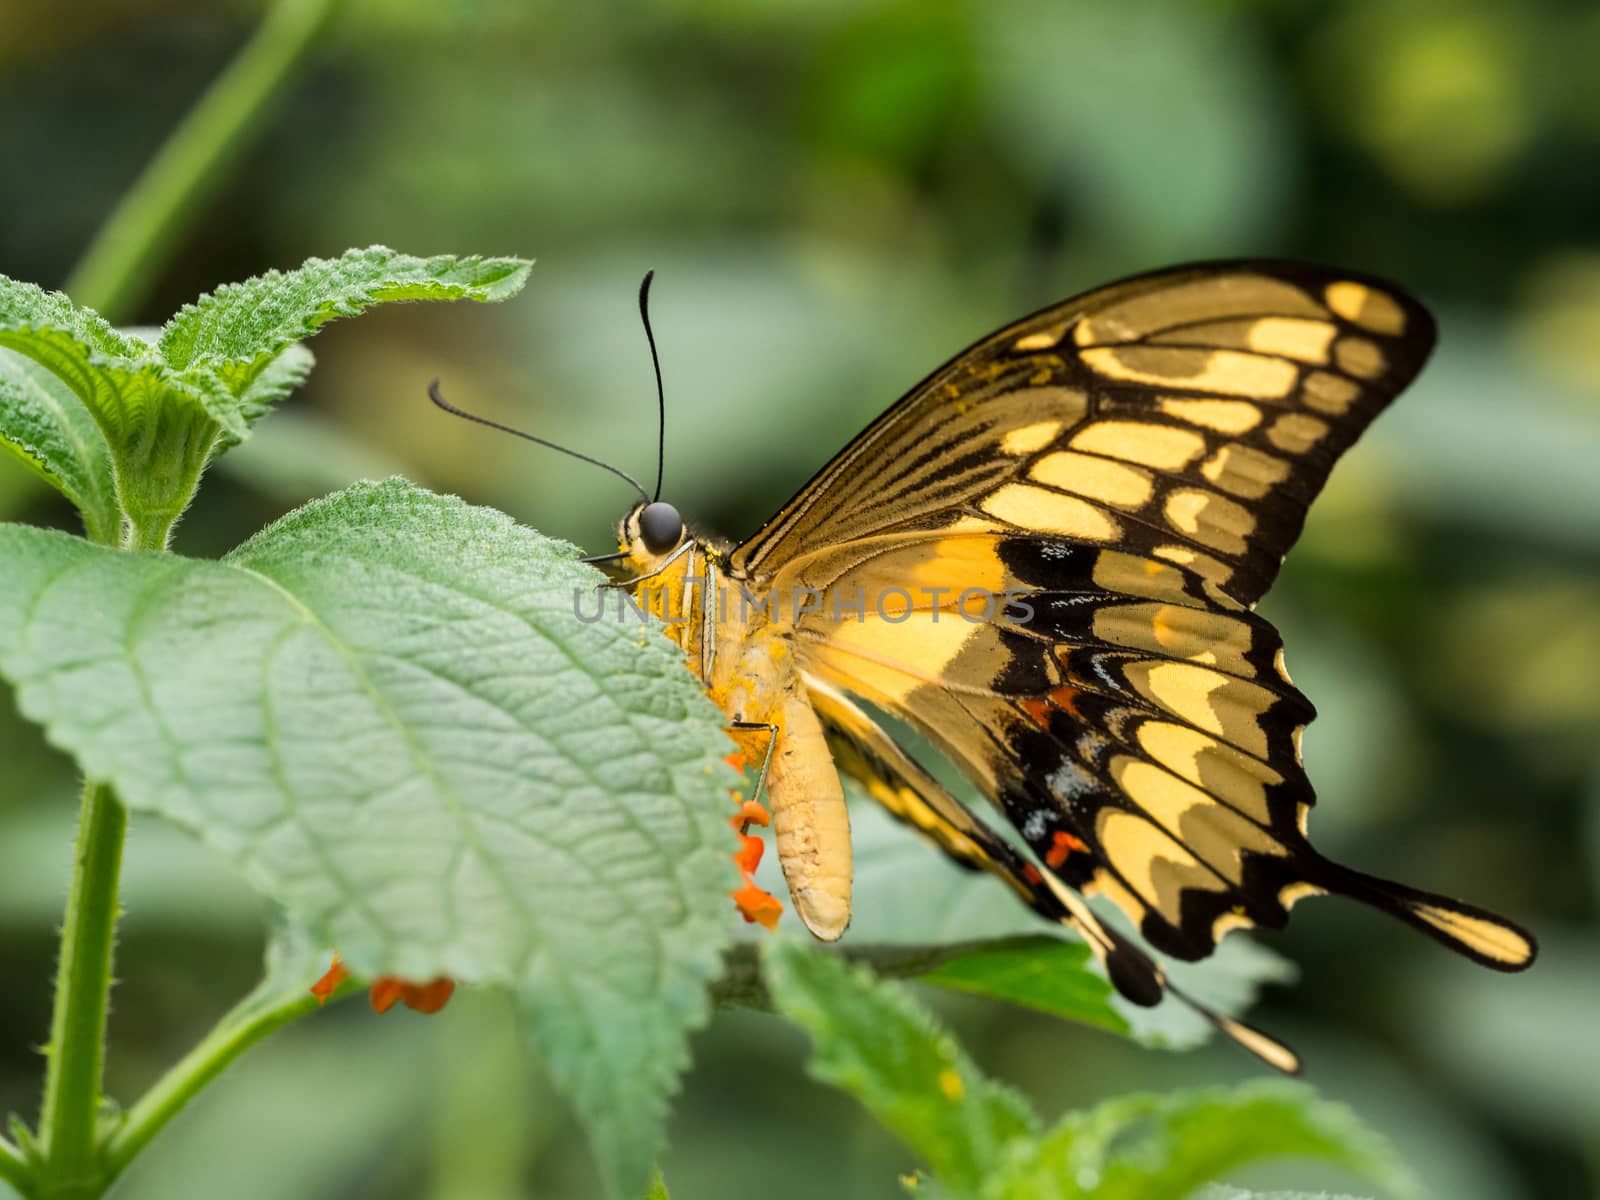 Big black and yellow striped butterfly resting on a leaf